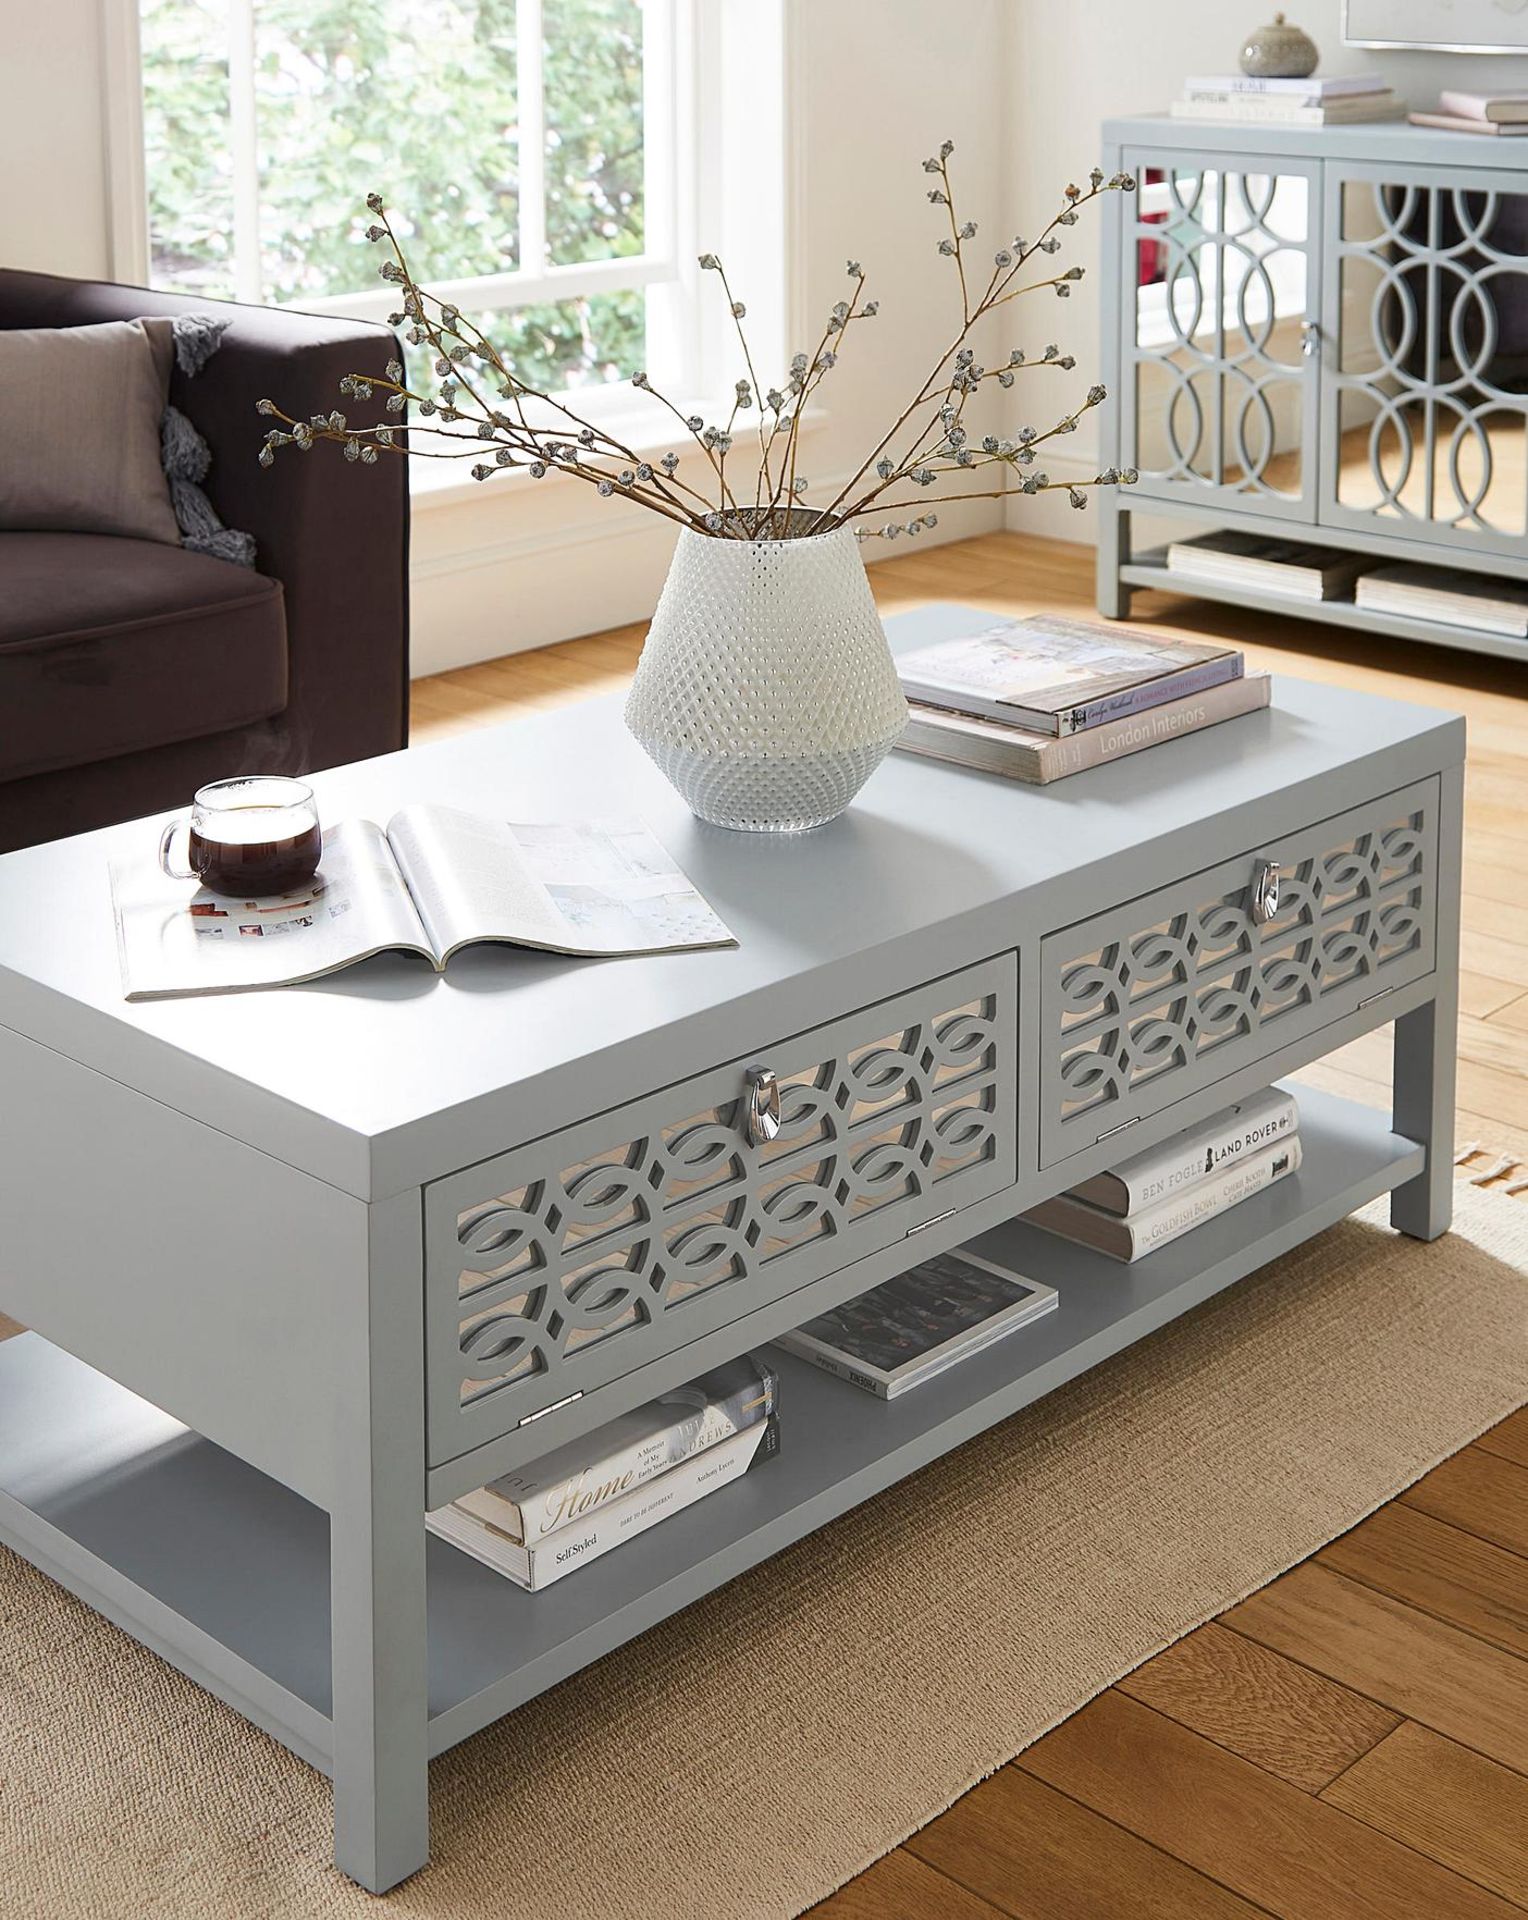 BRAND NEW CARMEL COFFEE TABLE RRP £399, Sophisticated and elegant, the Carmel range is perfect for